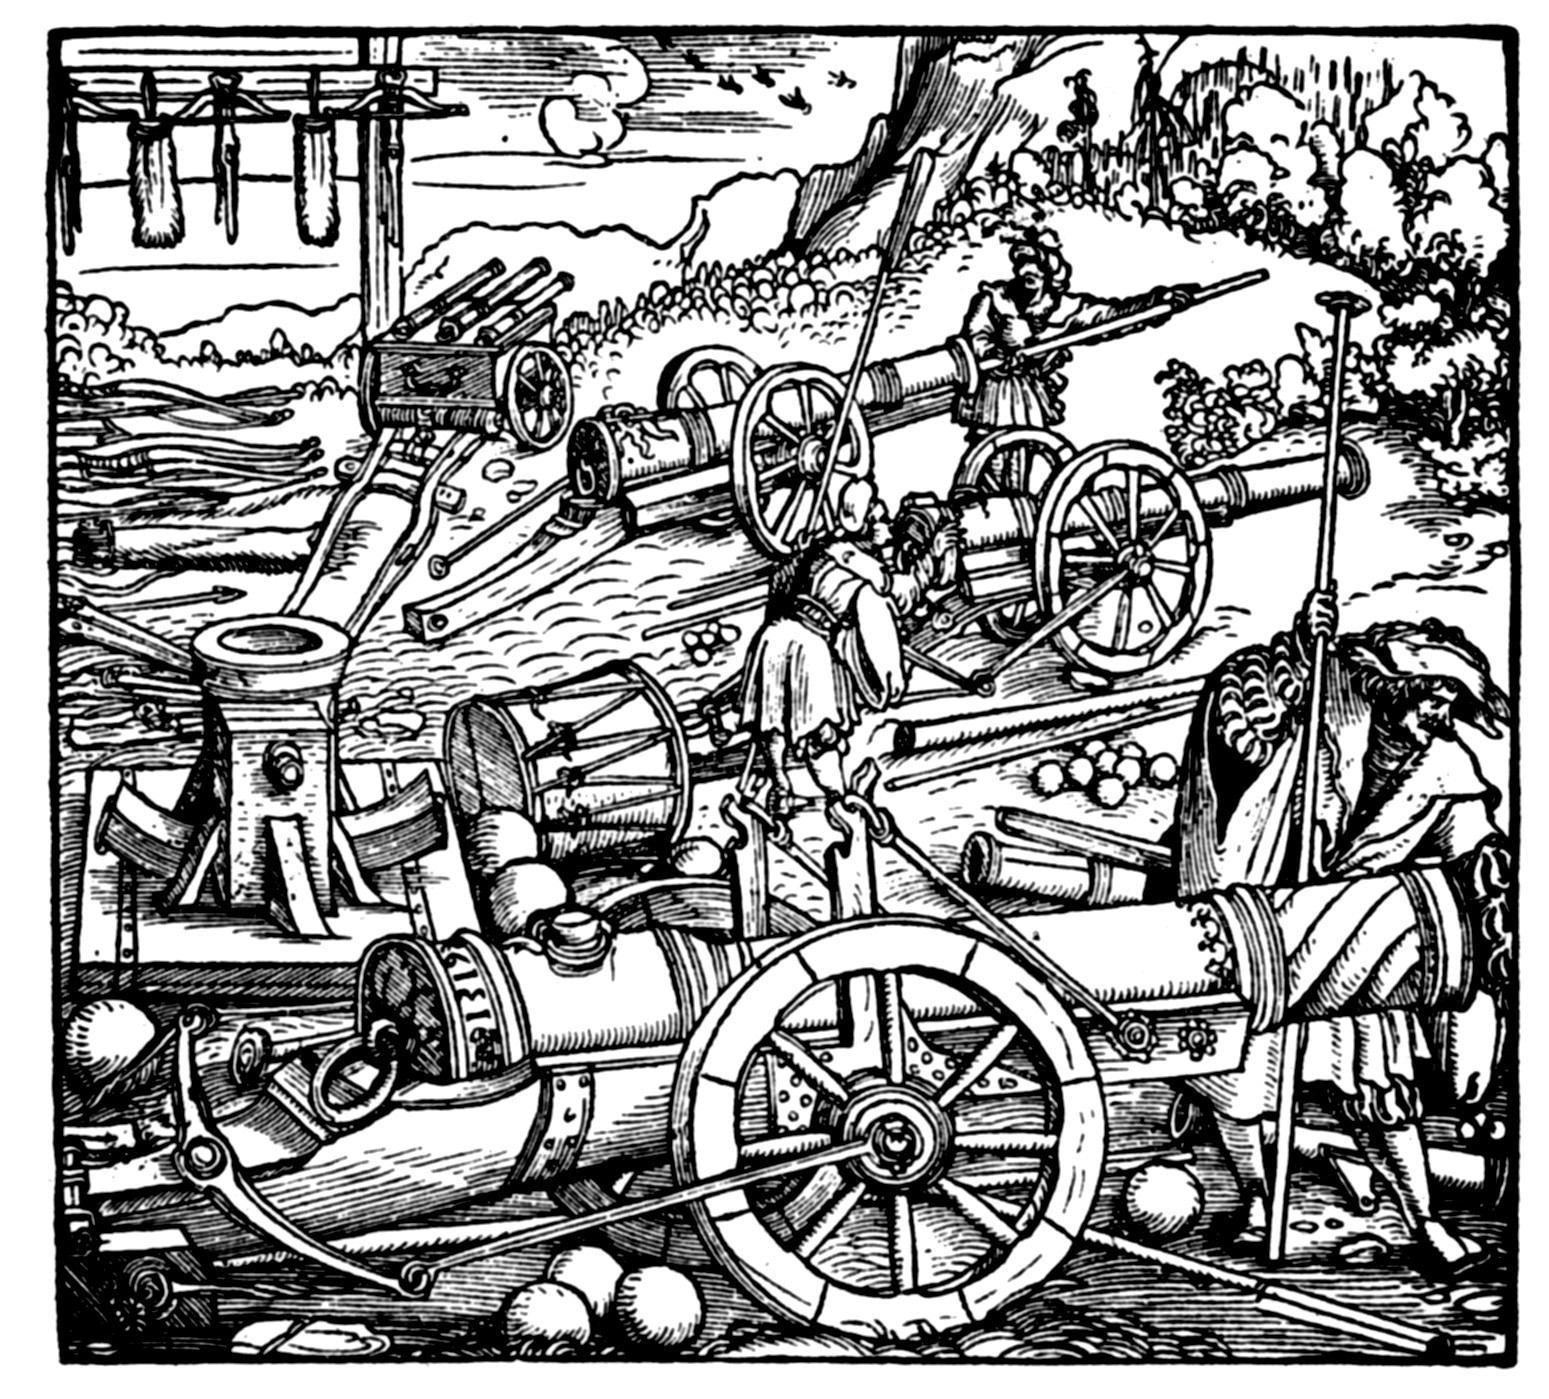 Landsknechts service their massive artillery in this 16th century German woodcut. Gunpowder for the cannons was in short supply, as was also compensation for the mercenaries.